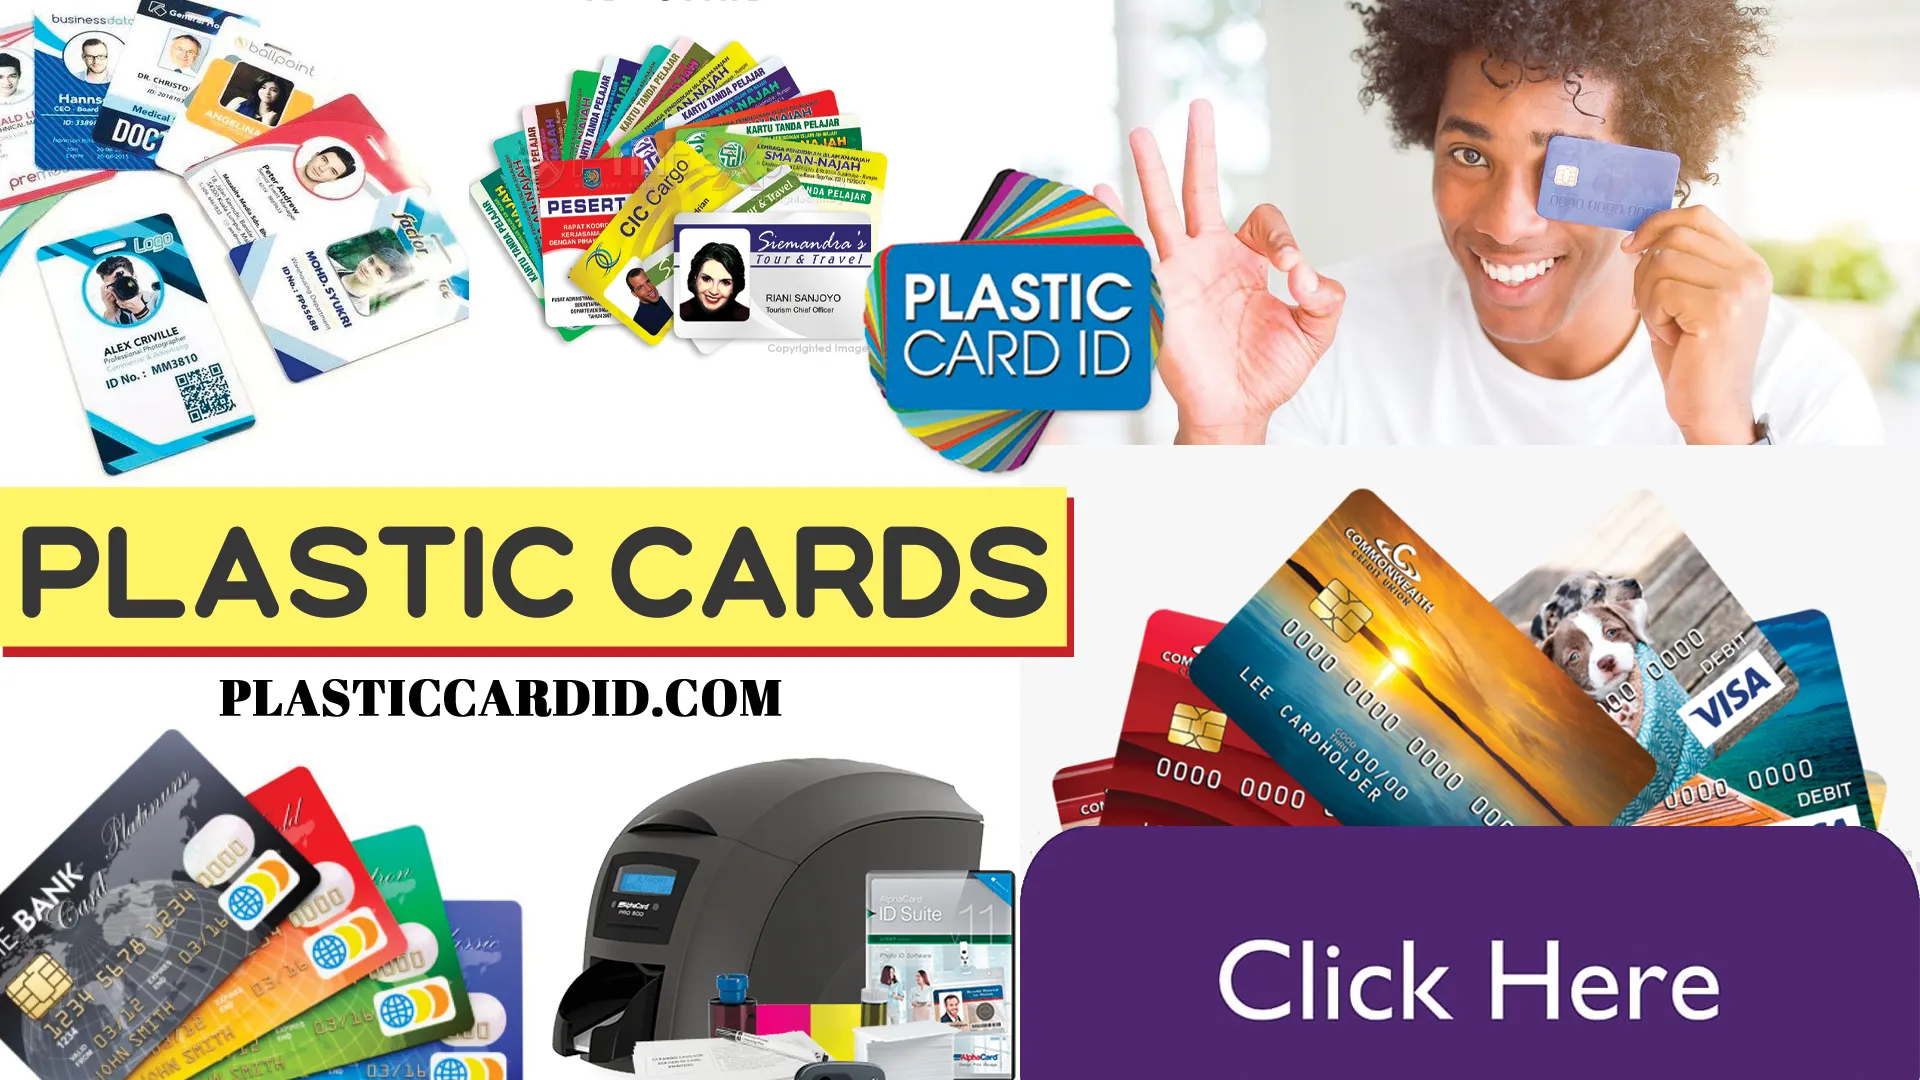 Keep Your Plastic Cards in Peak Condition with Plastic Card ID




